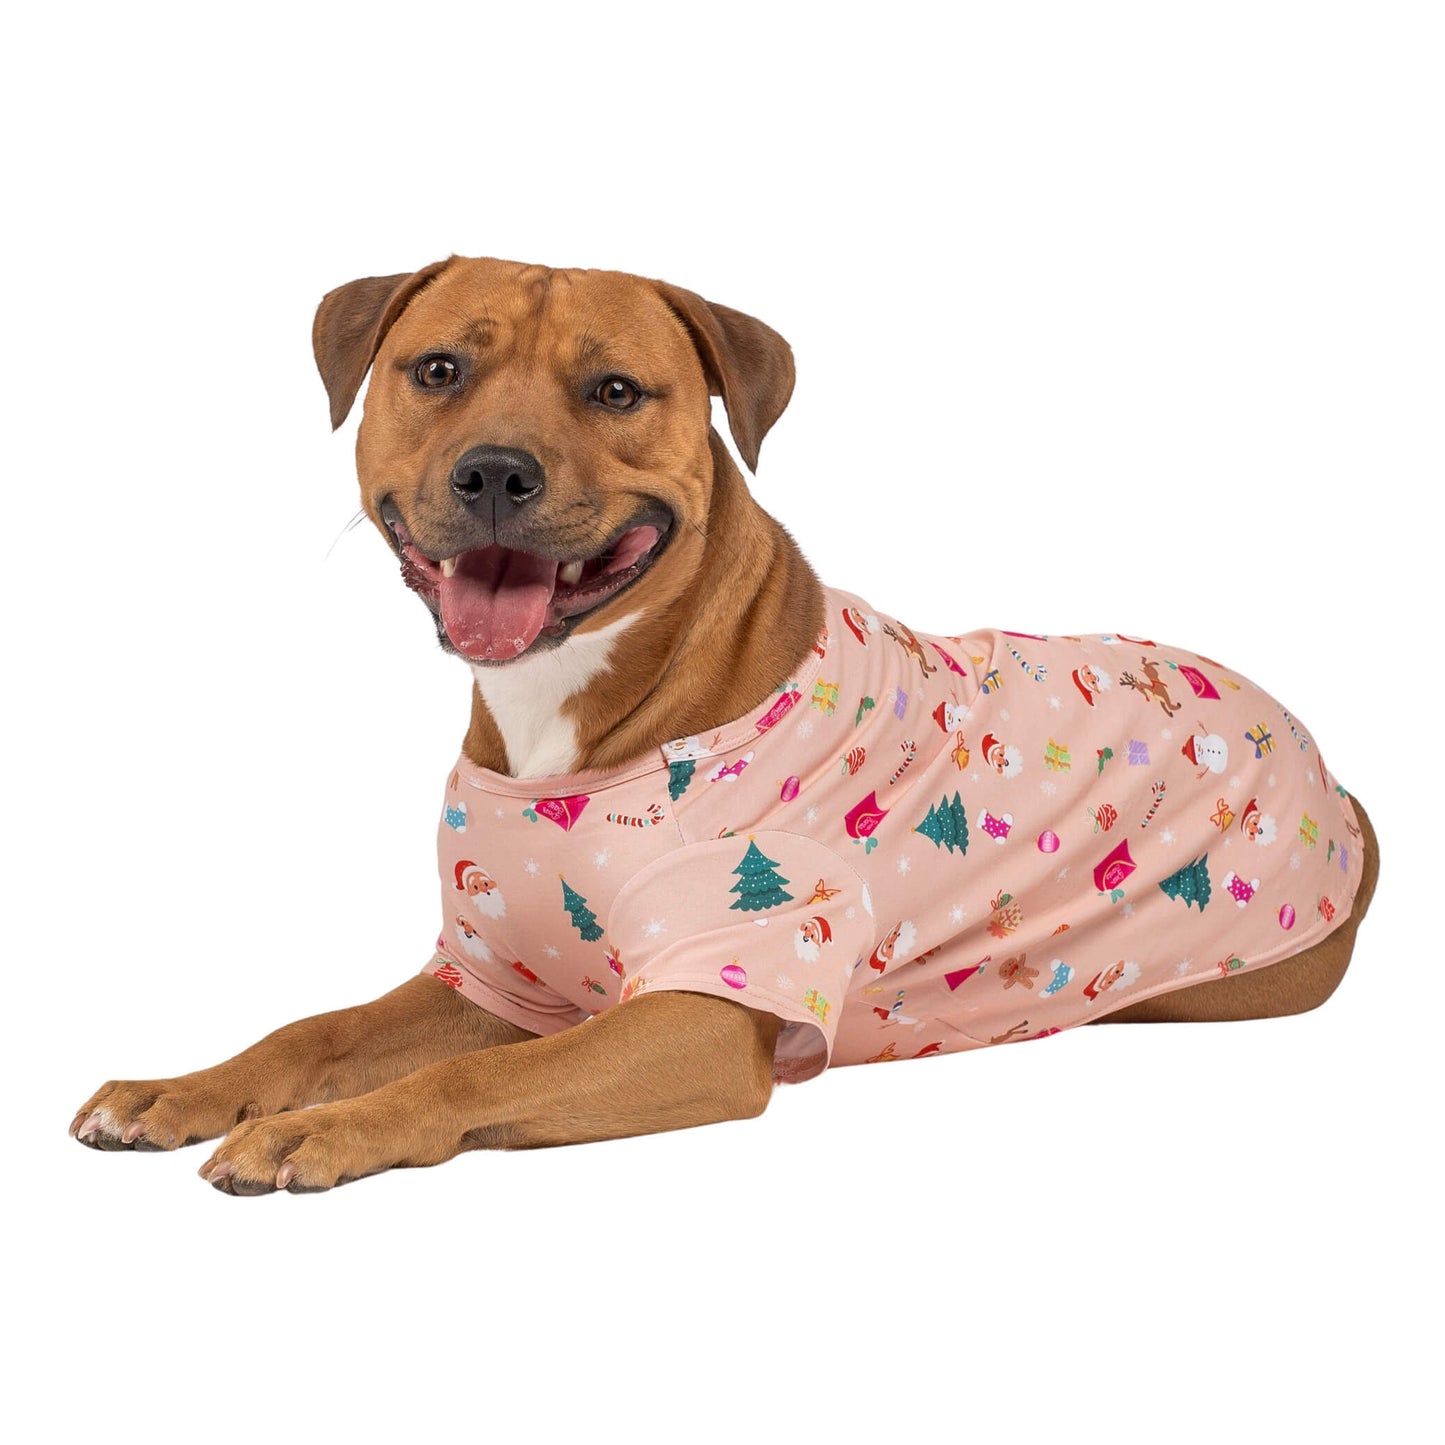 Arlo the Staffy laying down wearing Vibrant Hounds Dear Santa shirt for dogs.